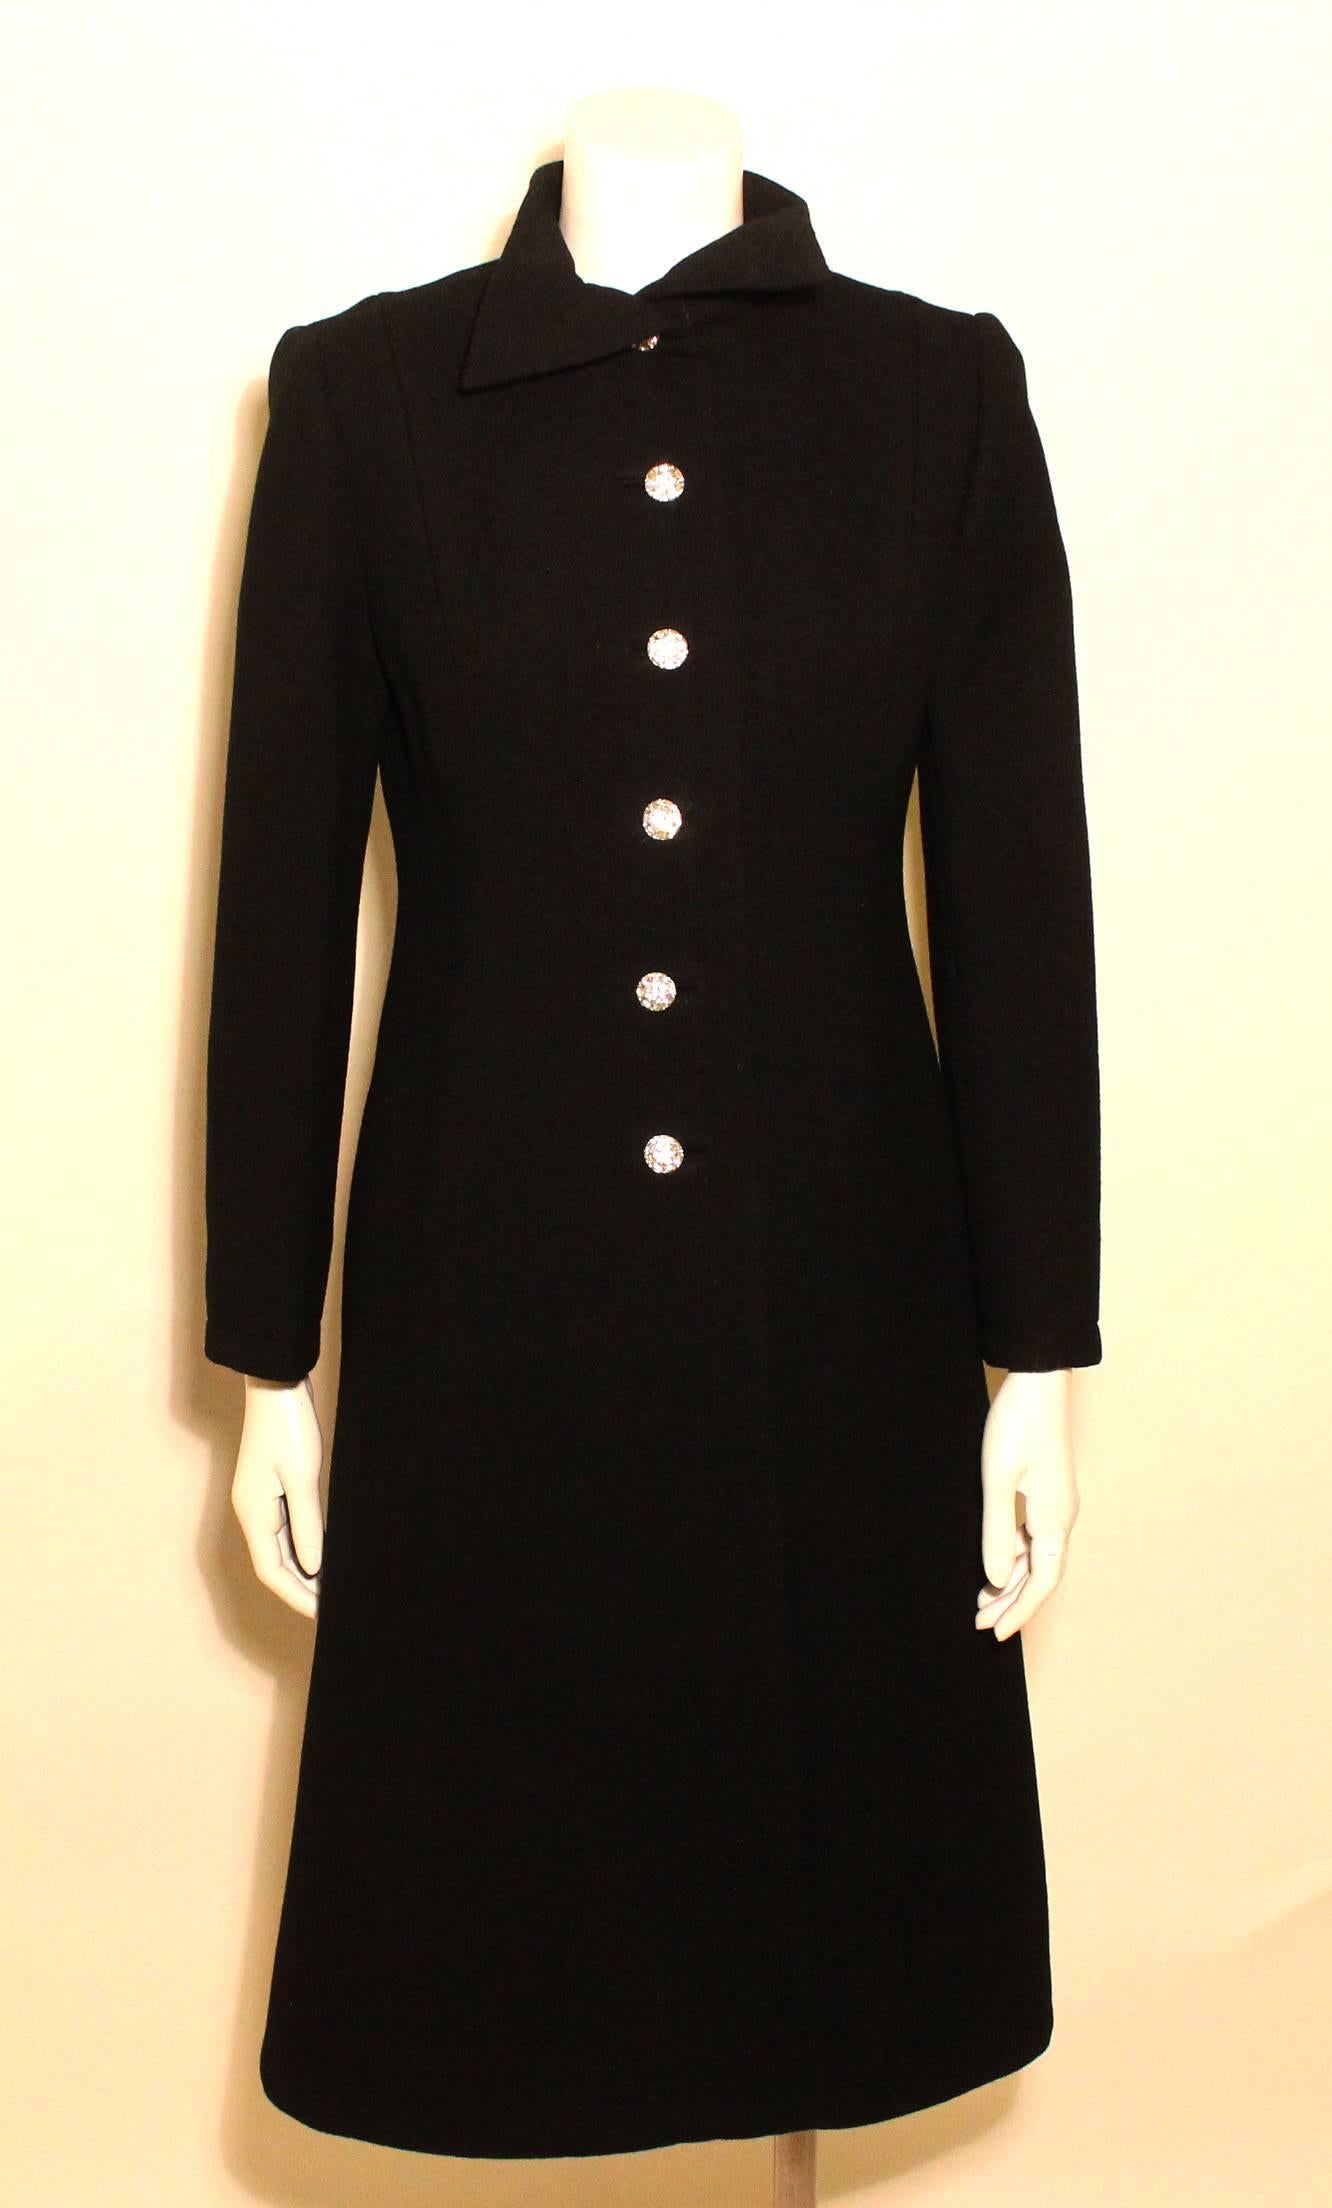 This is a stunning black wool evening coat with six rhinestone buttons down the front and back, with three on each sleeve. It is a classic a-line tapered shape. 